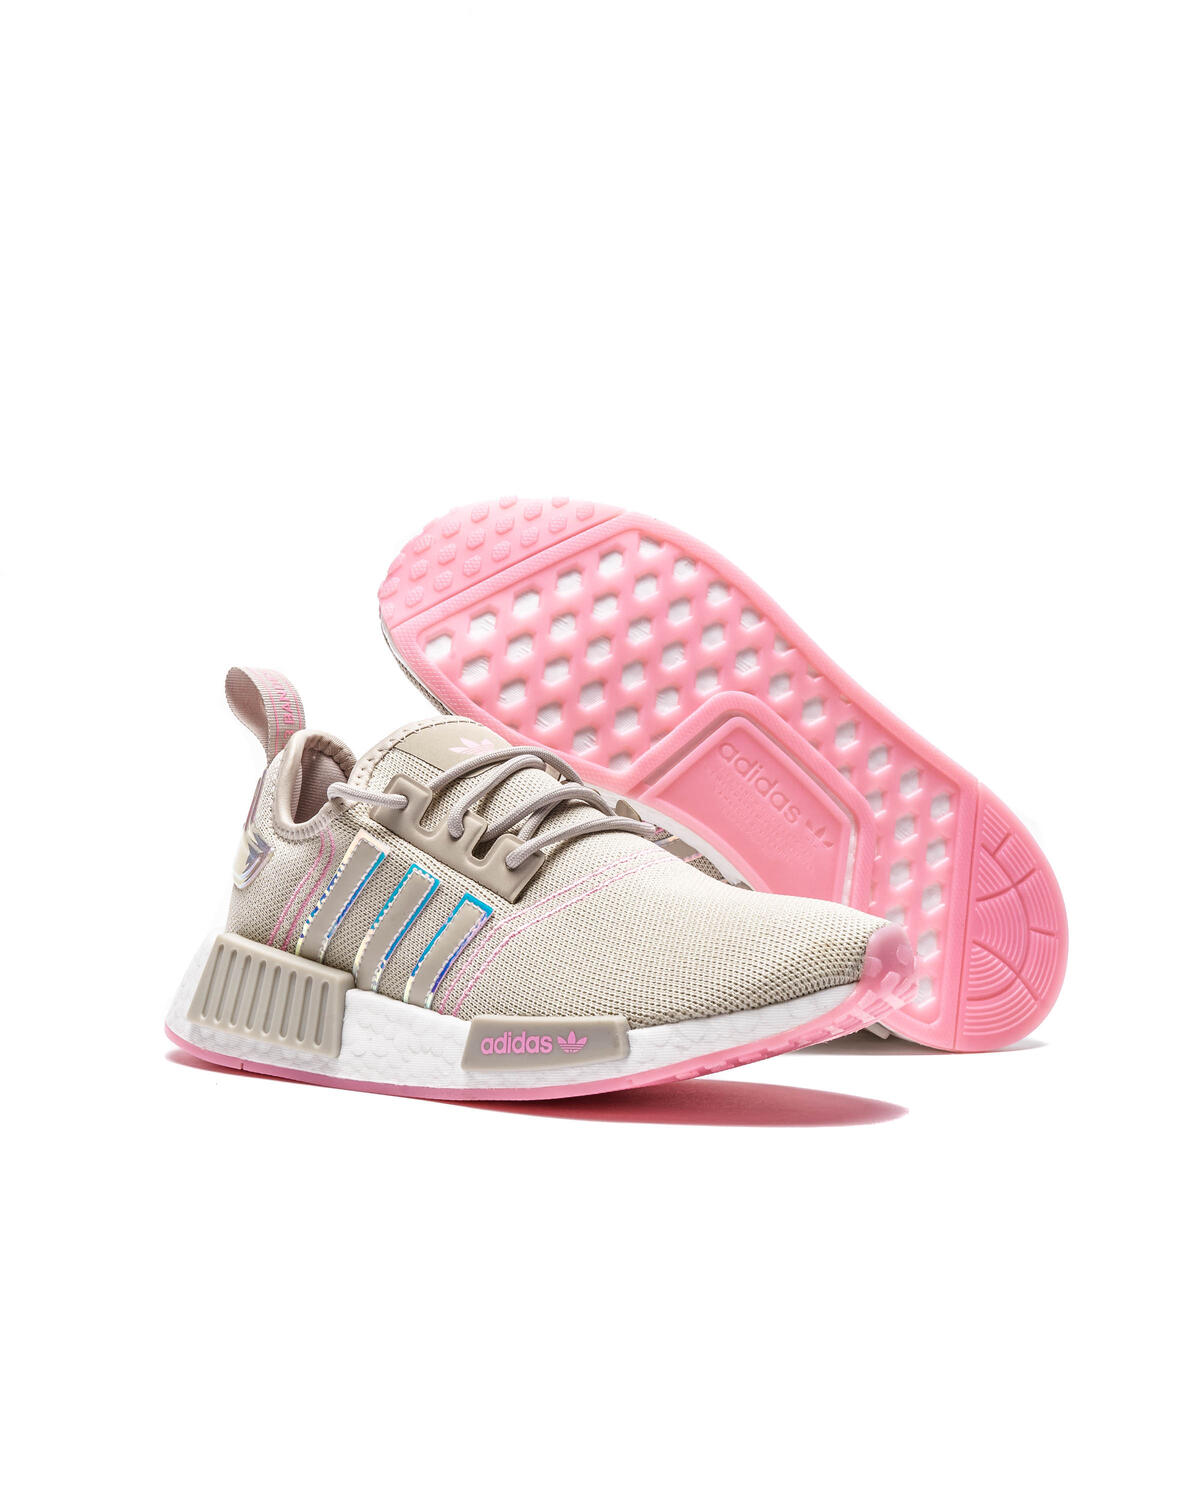 Israel Adidas NMD R1 Casual Shoes Women's / 8